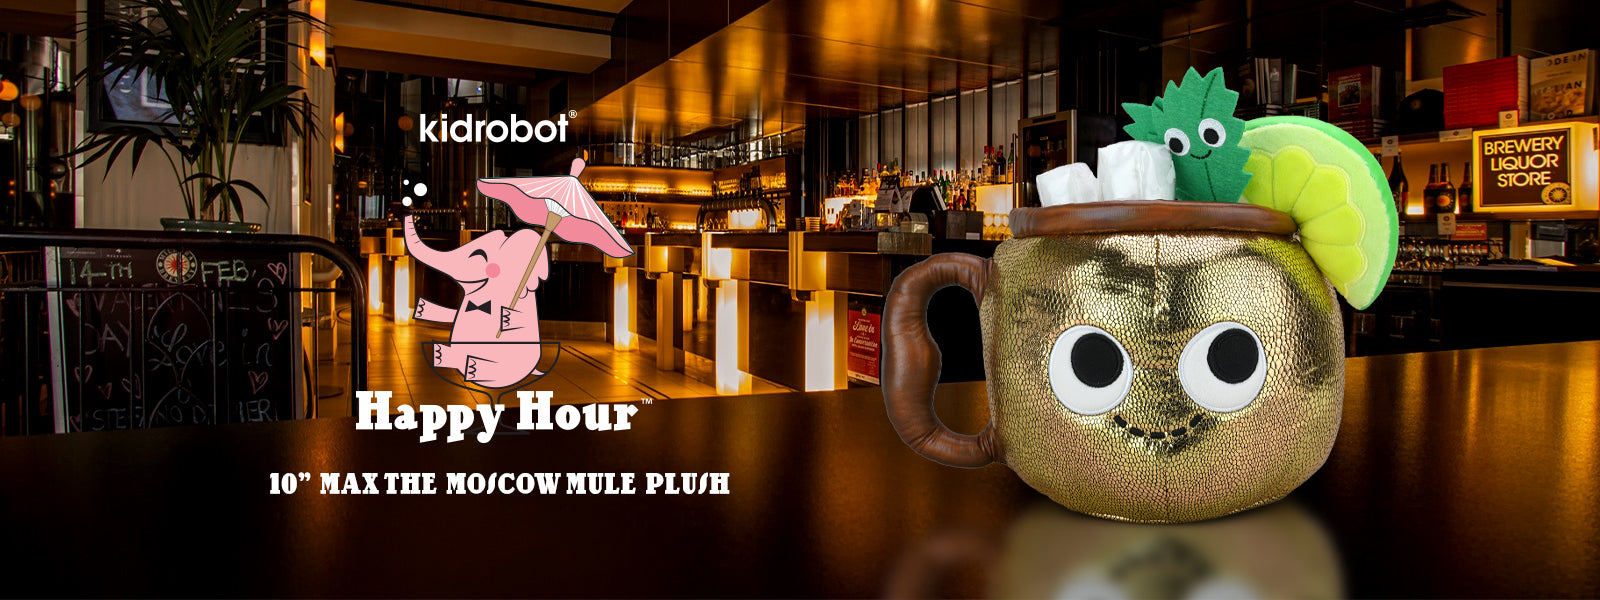 Happy Hour Cocktail Plush by Kidrobot - Adult Themed Plush Pillows featuring Moscow Mules and Pina Coladas